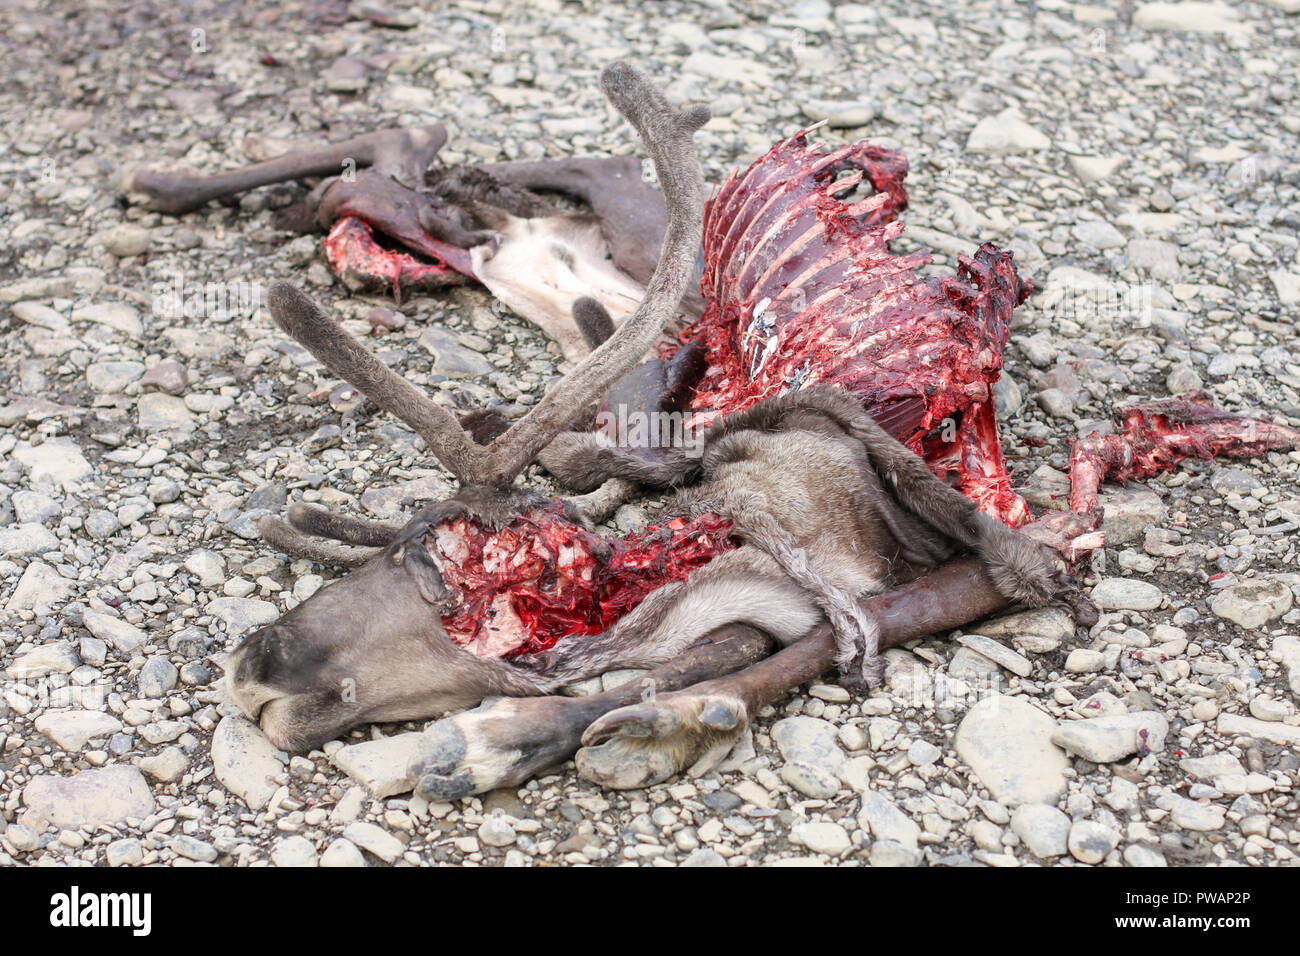 Yukon river, Yukon Territory, Alaska. Caribou dead lying on the ground after being attacked and eaten by artic wolfs. Stock Photo